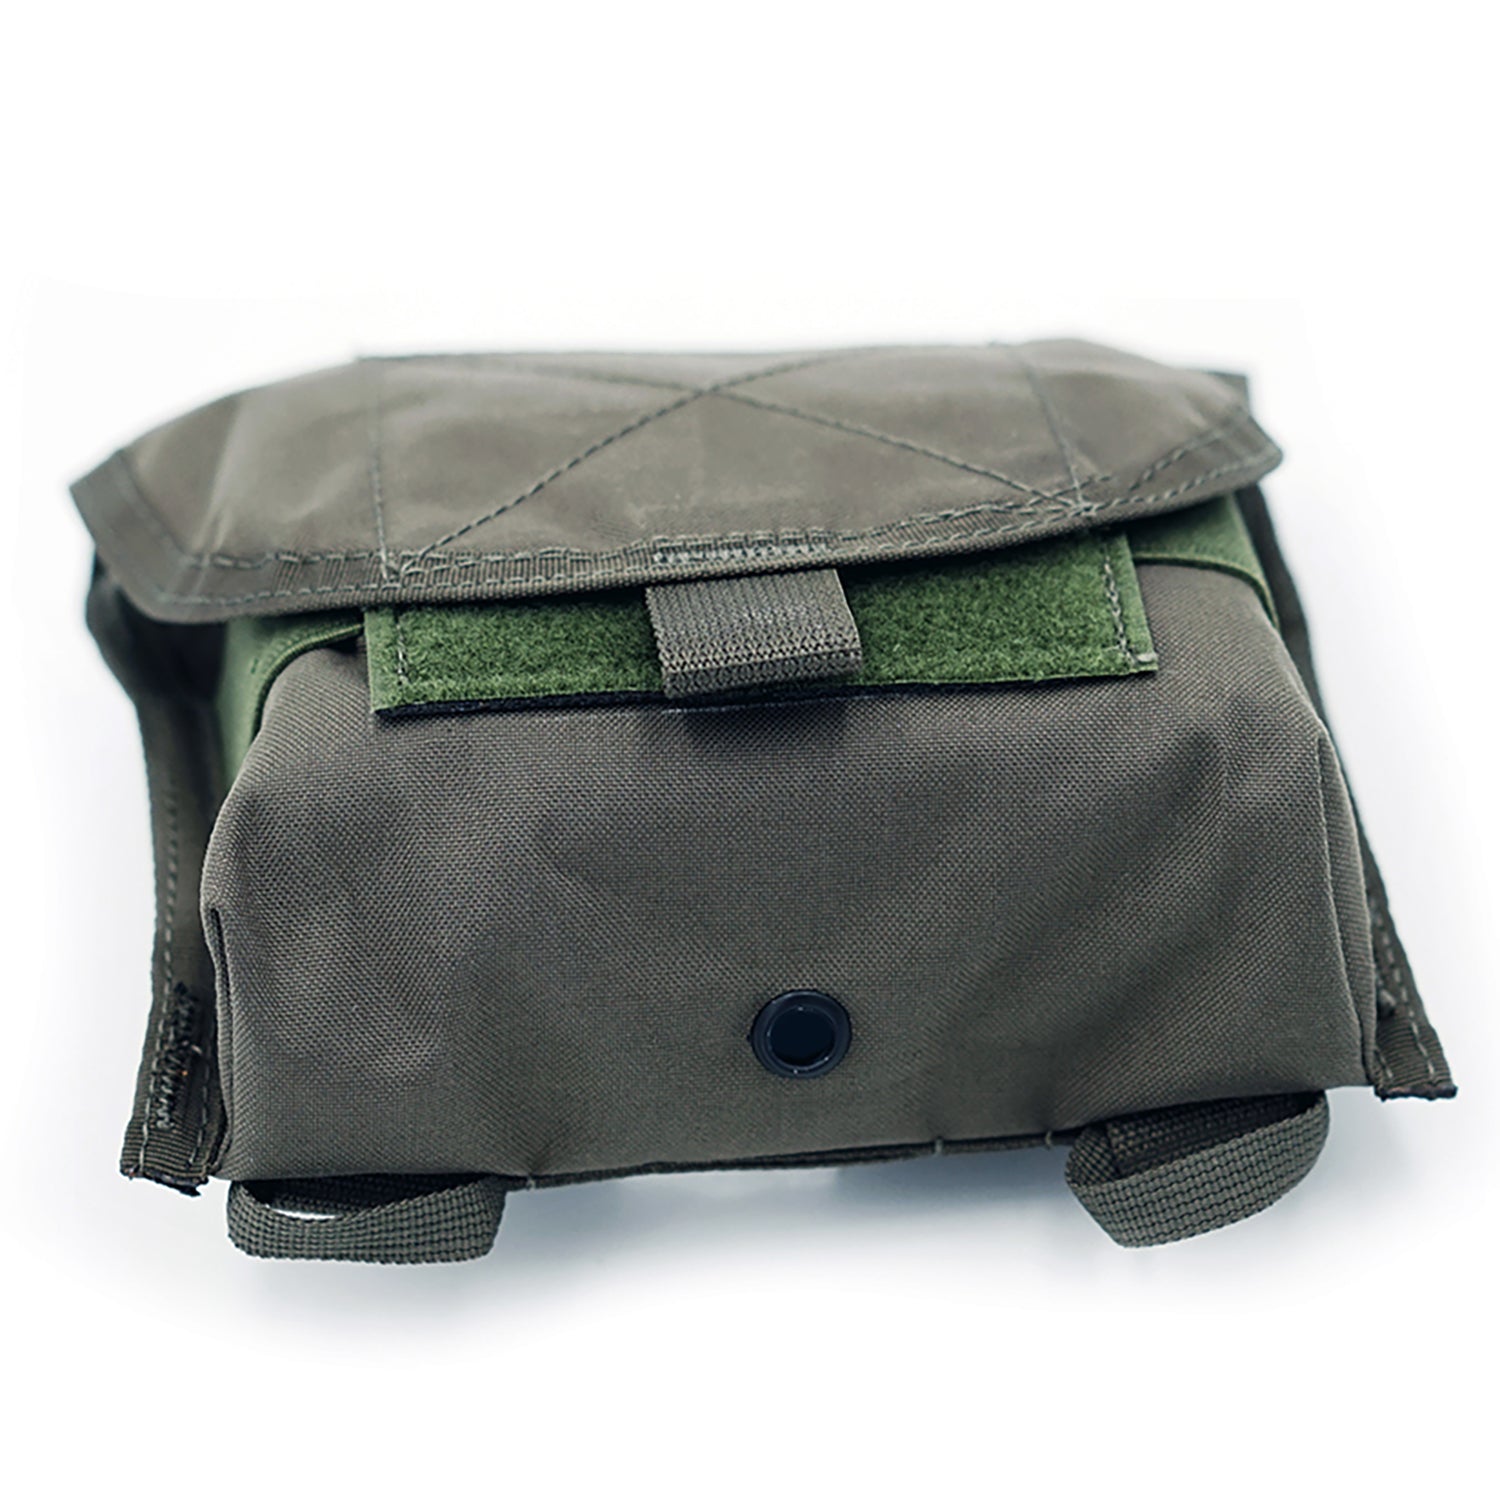 Pre MSA Paraclete style 50cal Pouch - Shekkin Gears